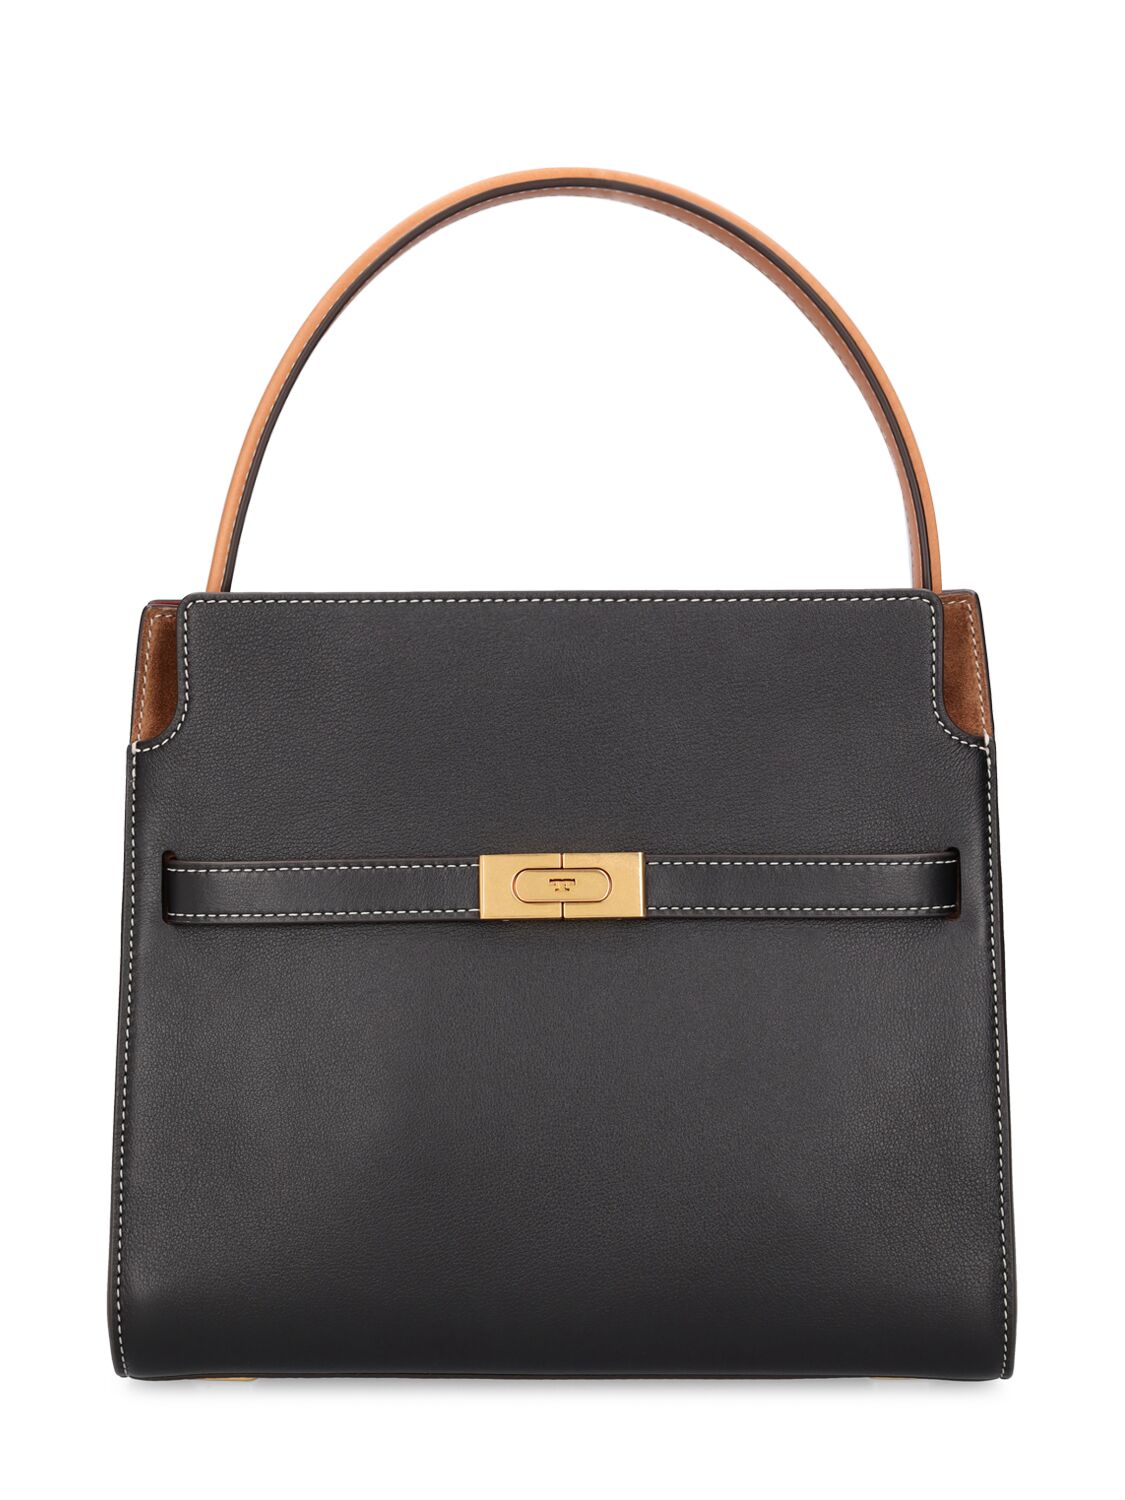 Image of Small Lee Radziwill Leather Double Bag